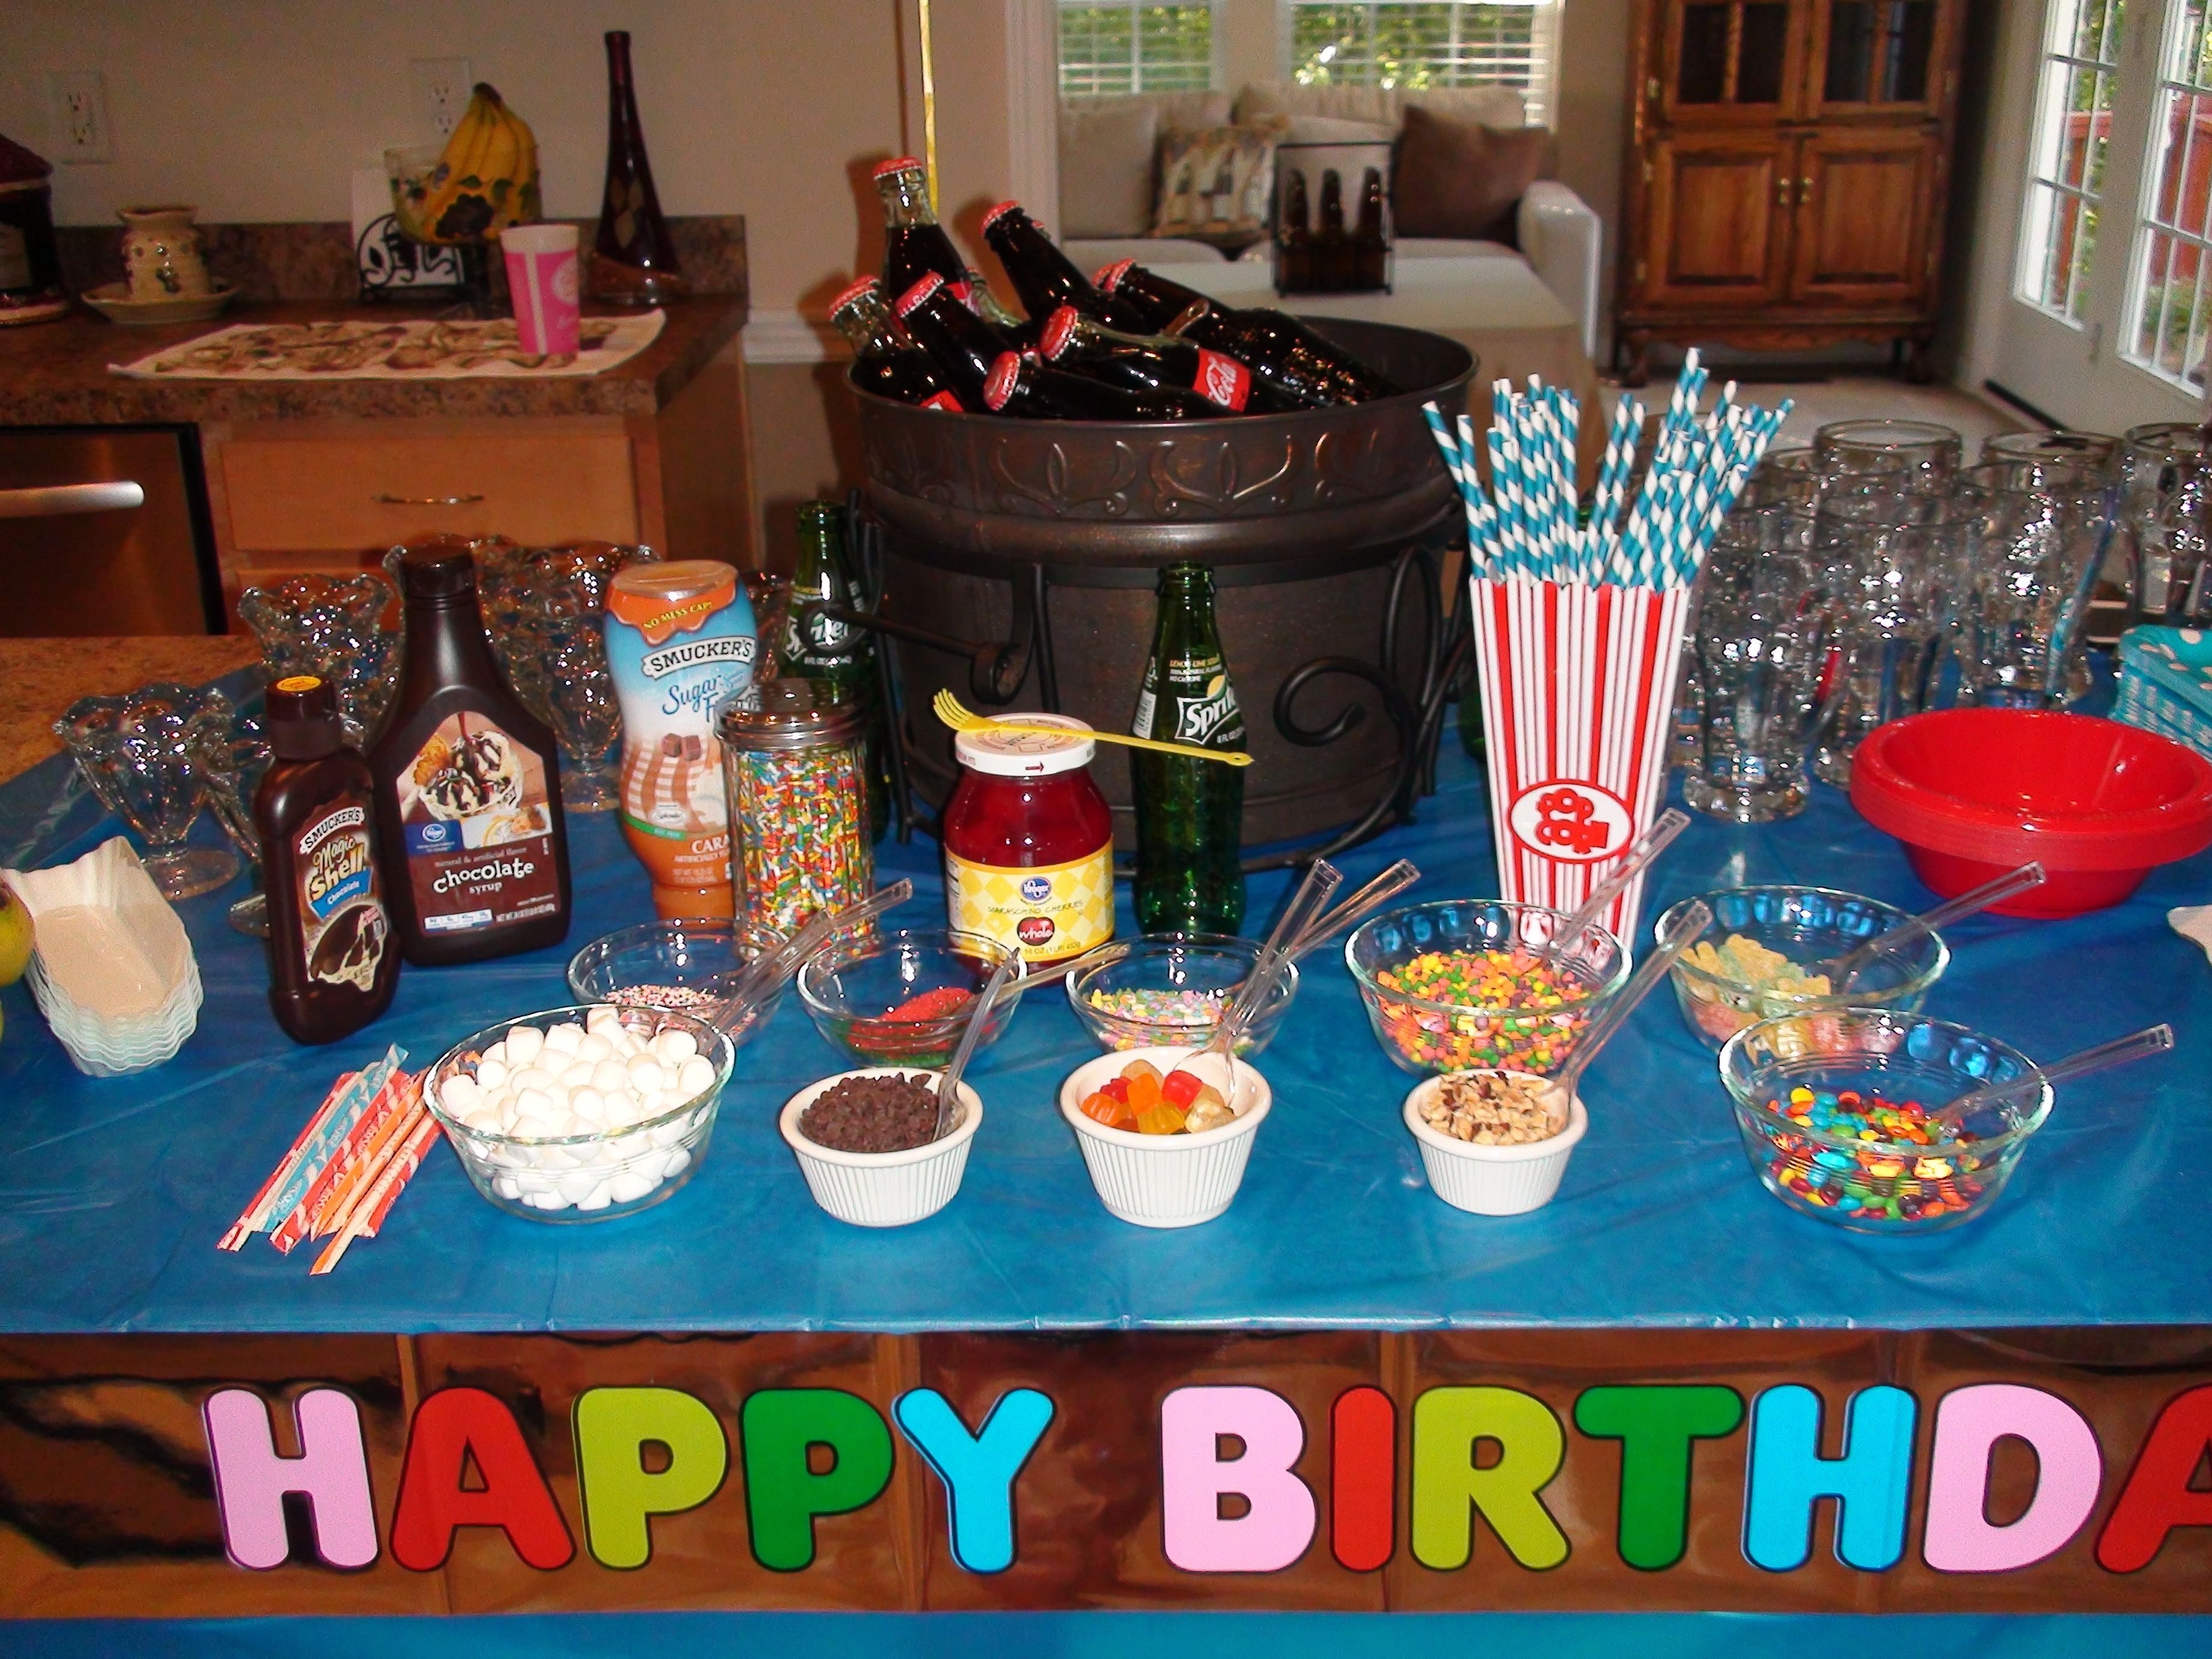 10 Beautiful 12 Year Old Birthday Party Ideas 12 year old party root beer floats banana splits ice cream with 3 2022